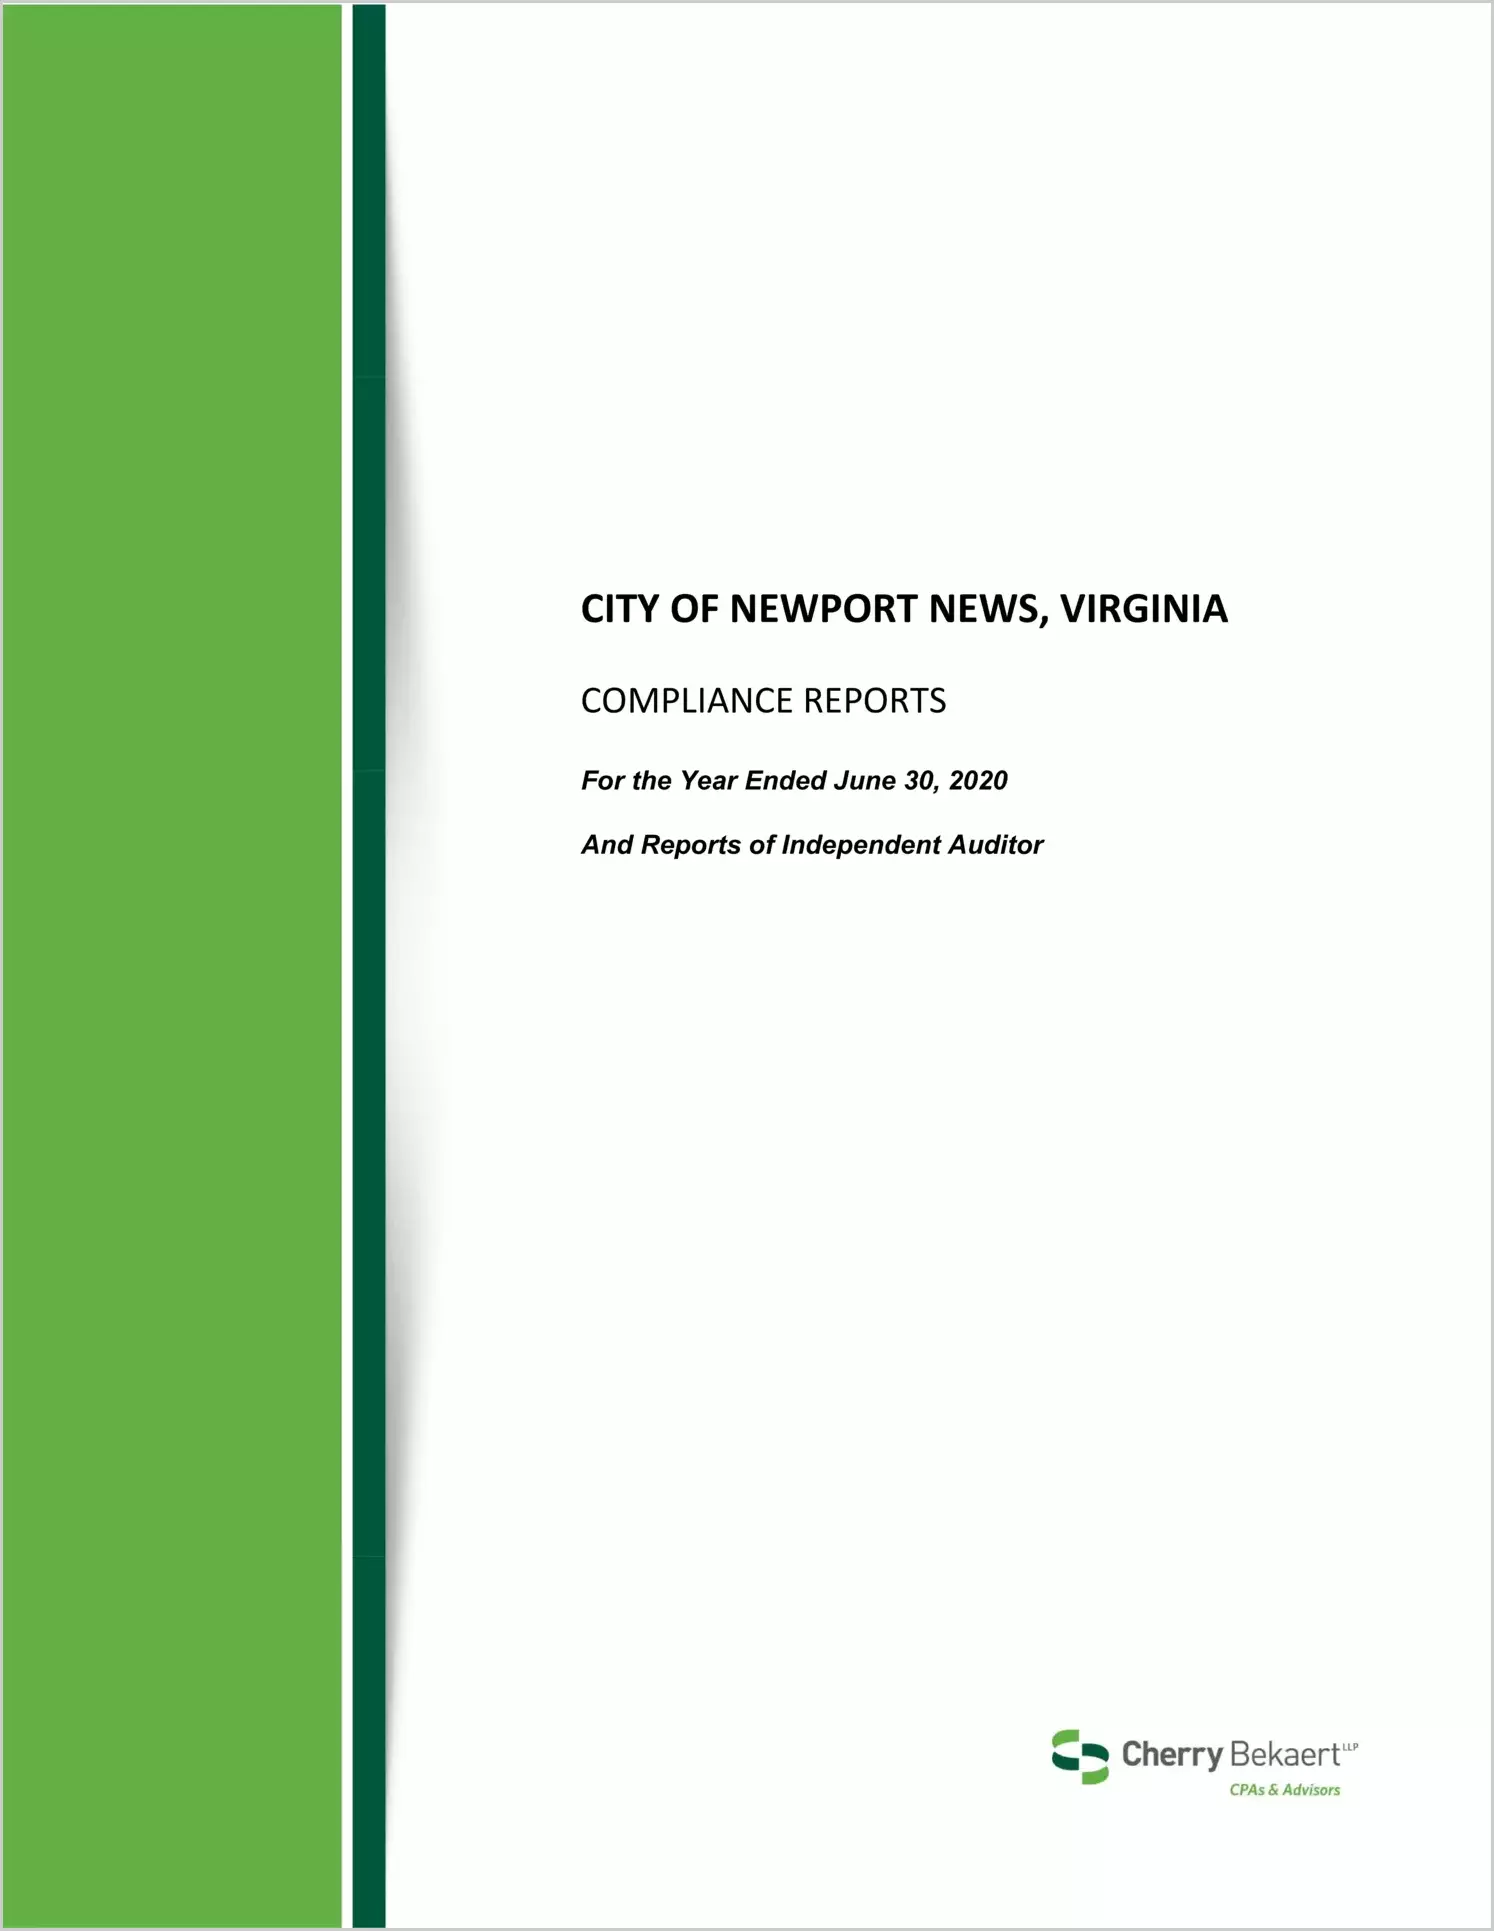 2020 Internal Control and Compliance Report for City of Newport News